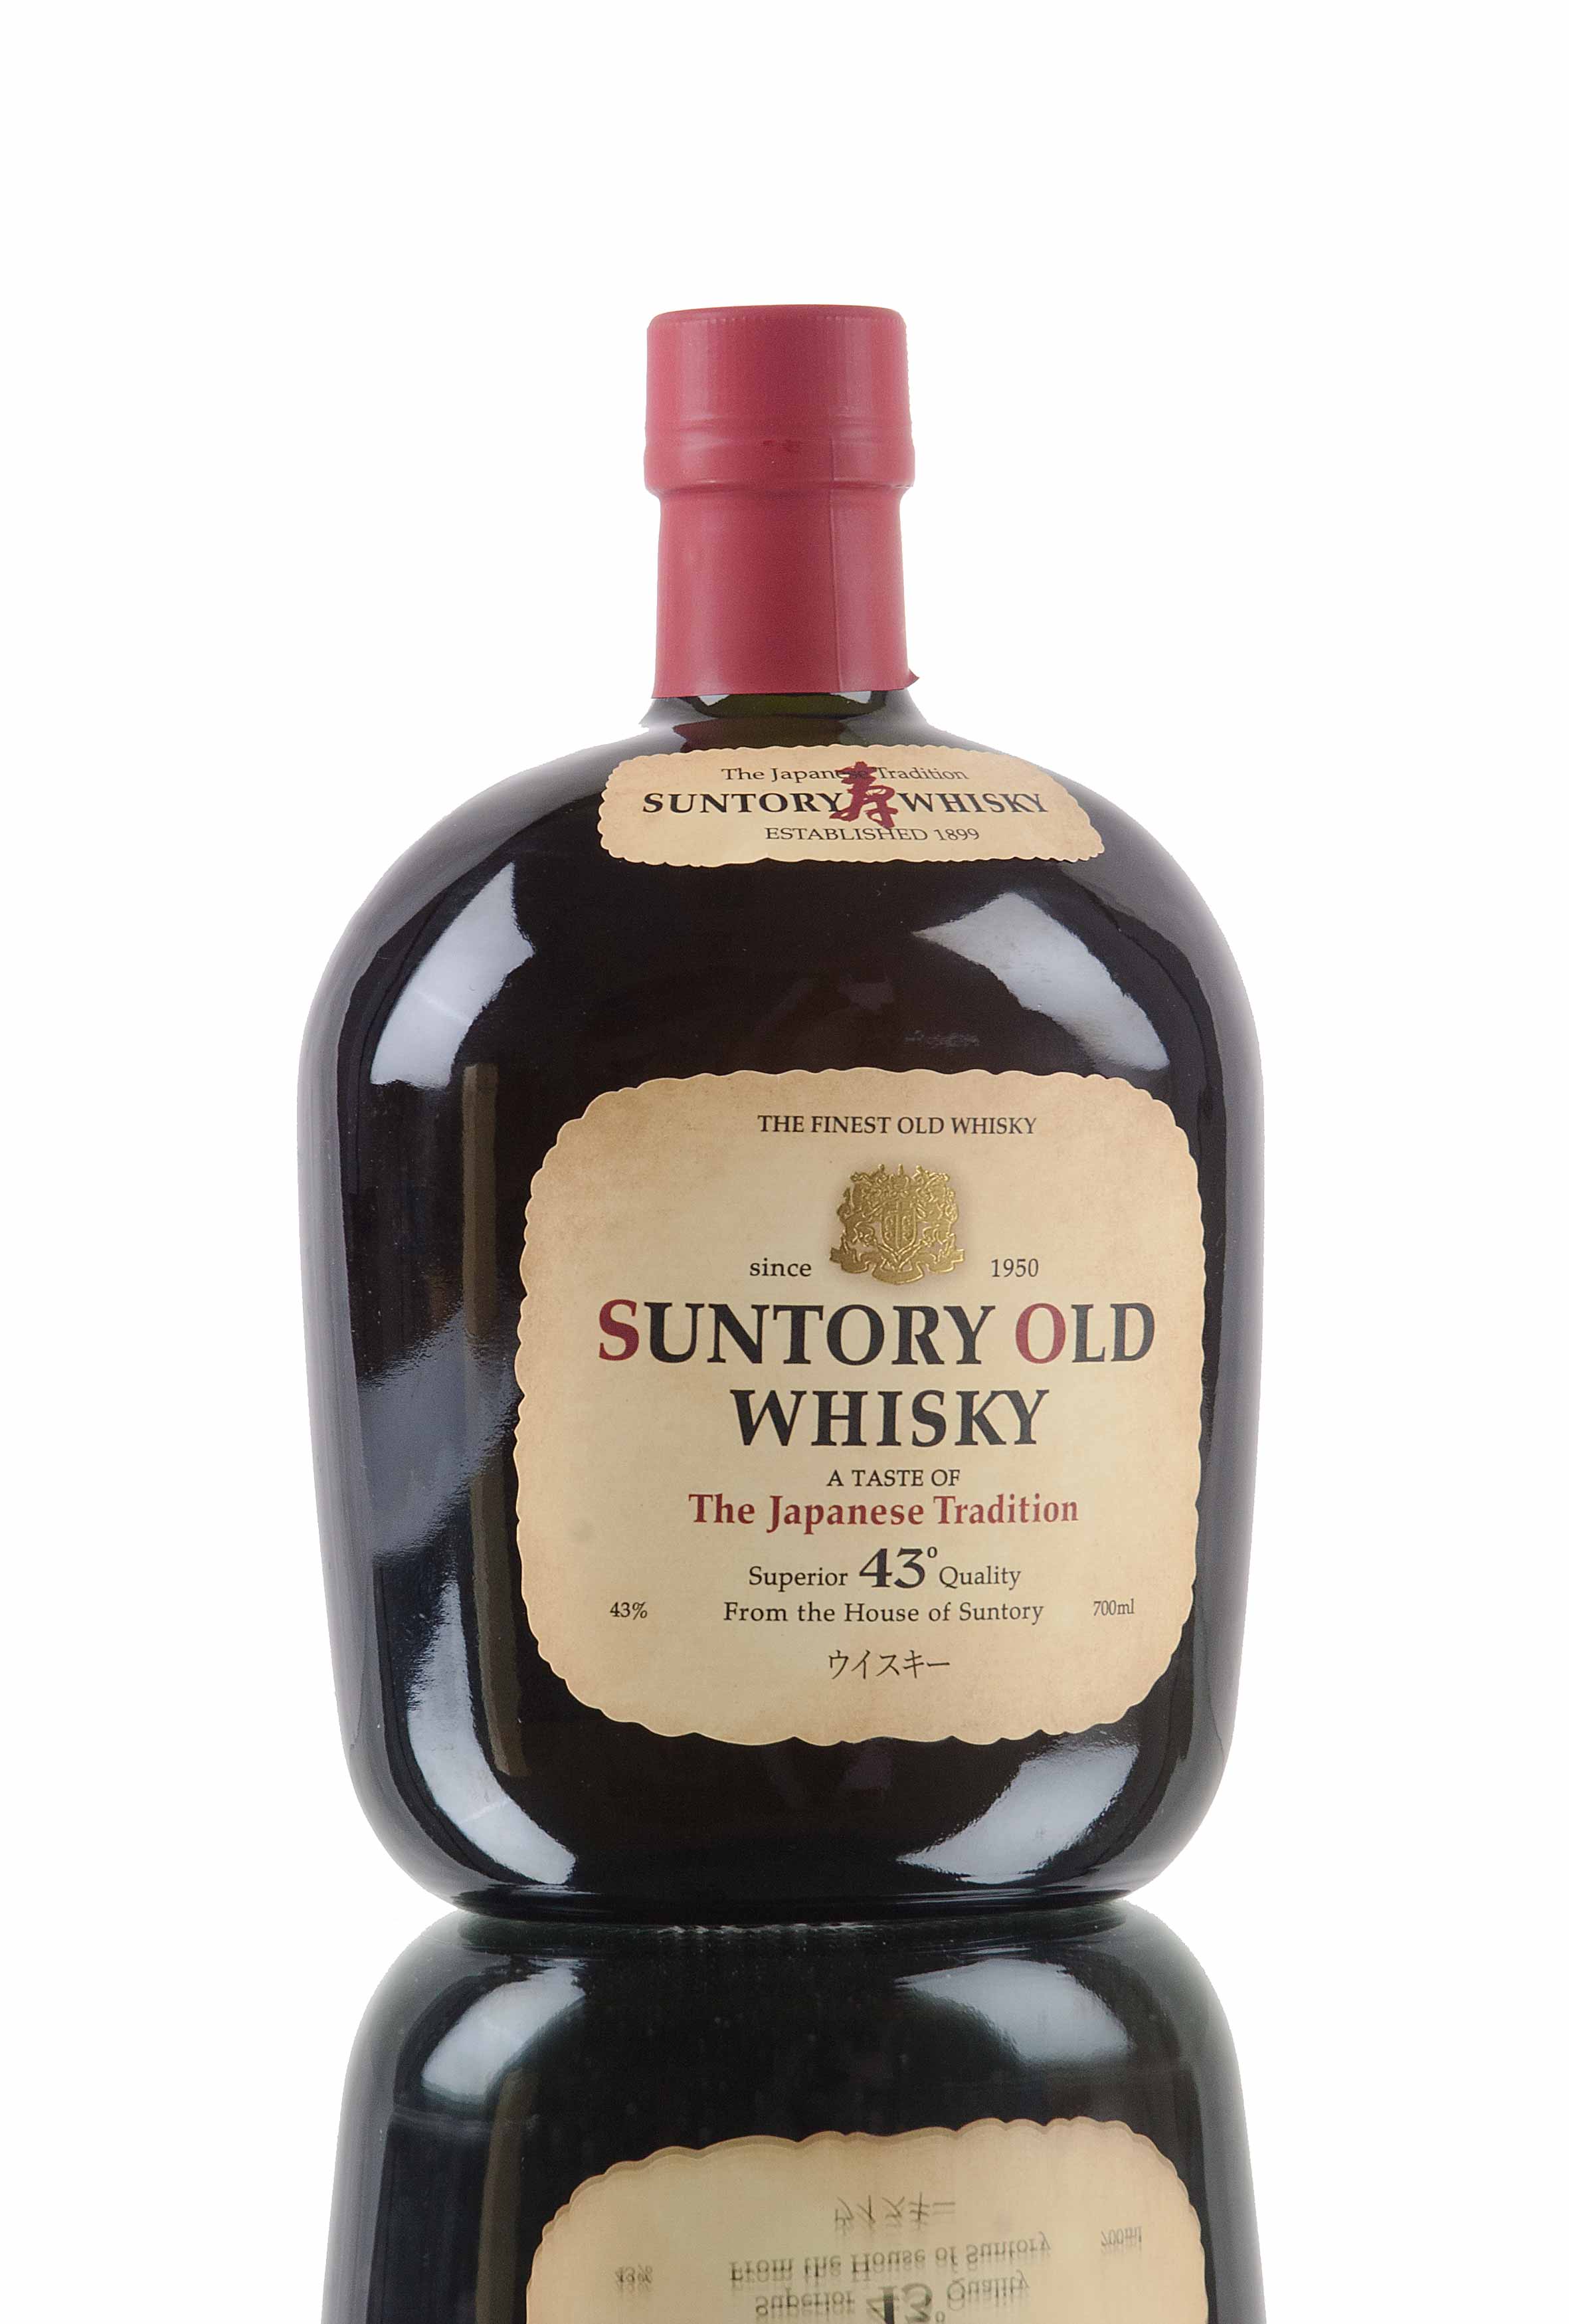 Suntory Old Whisky - The Japanese Tradition